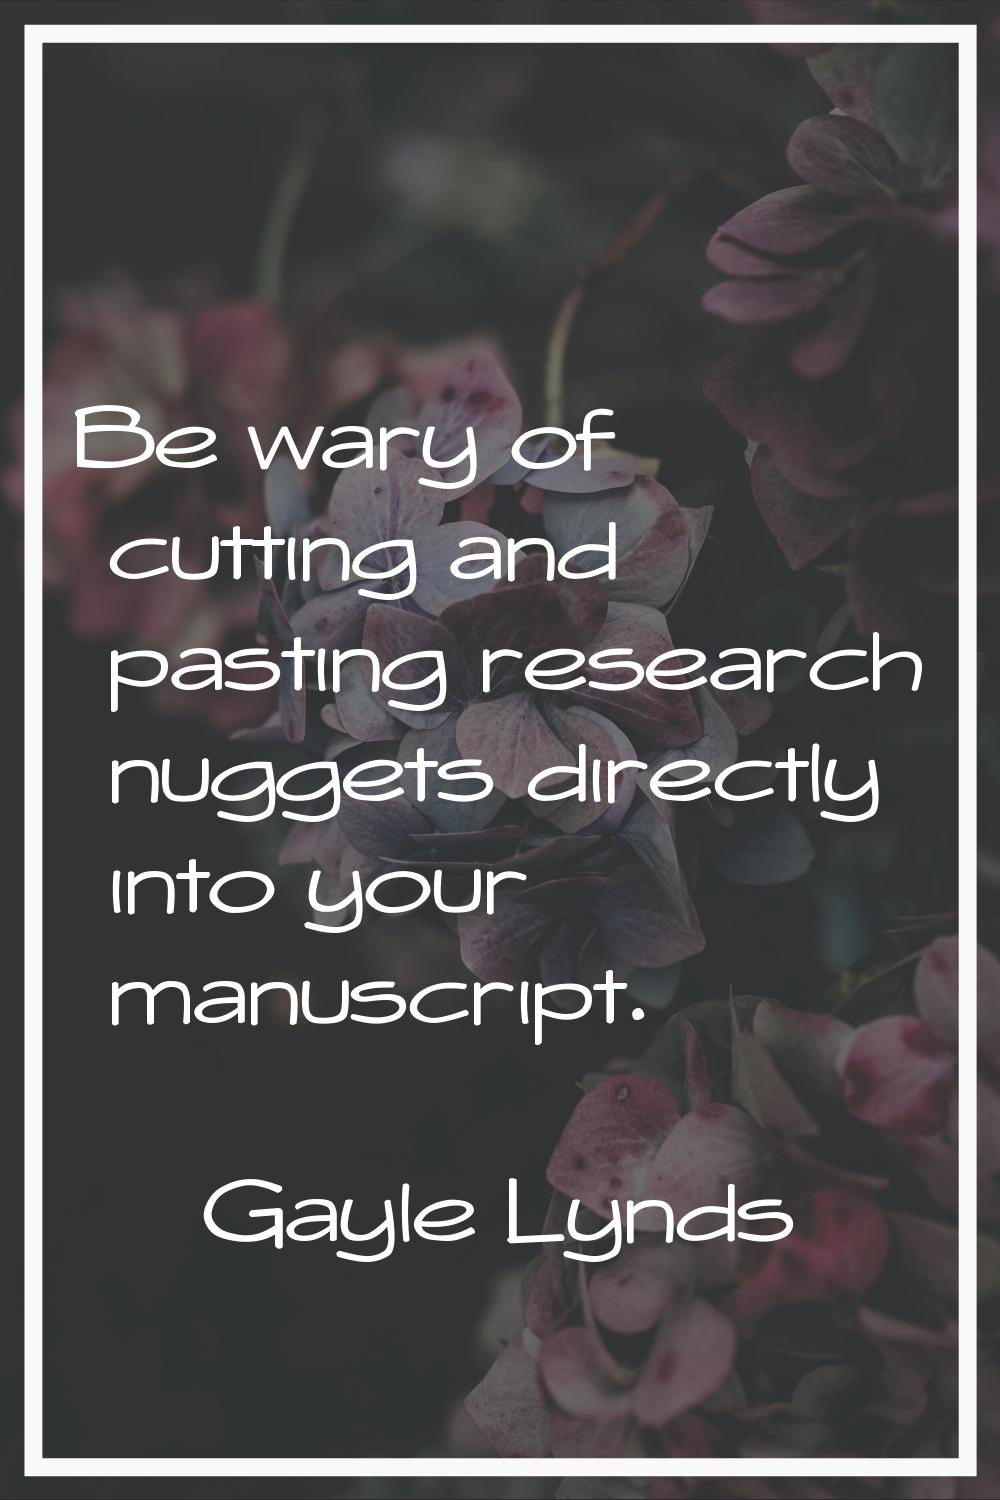 Be wary of cutting and pasting research nuggets directly into your manuscript.